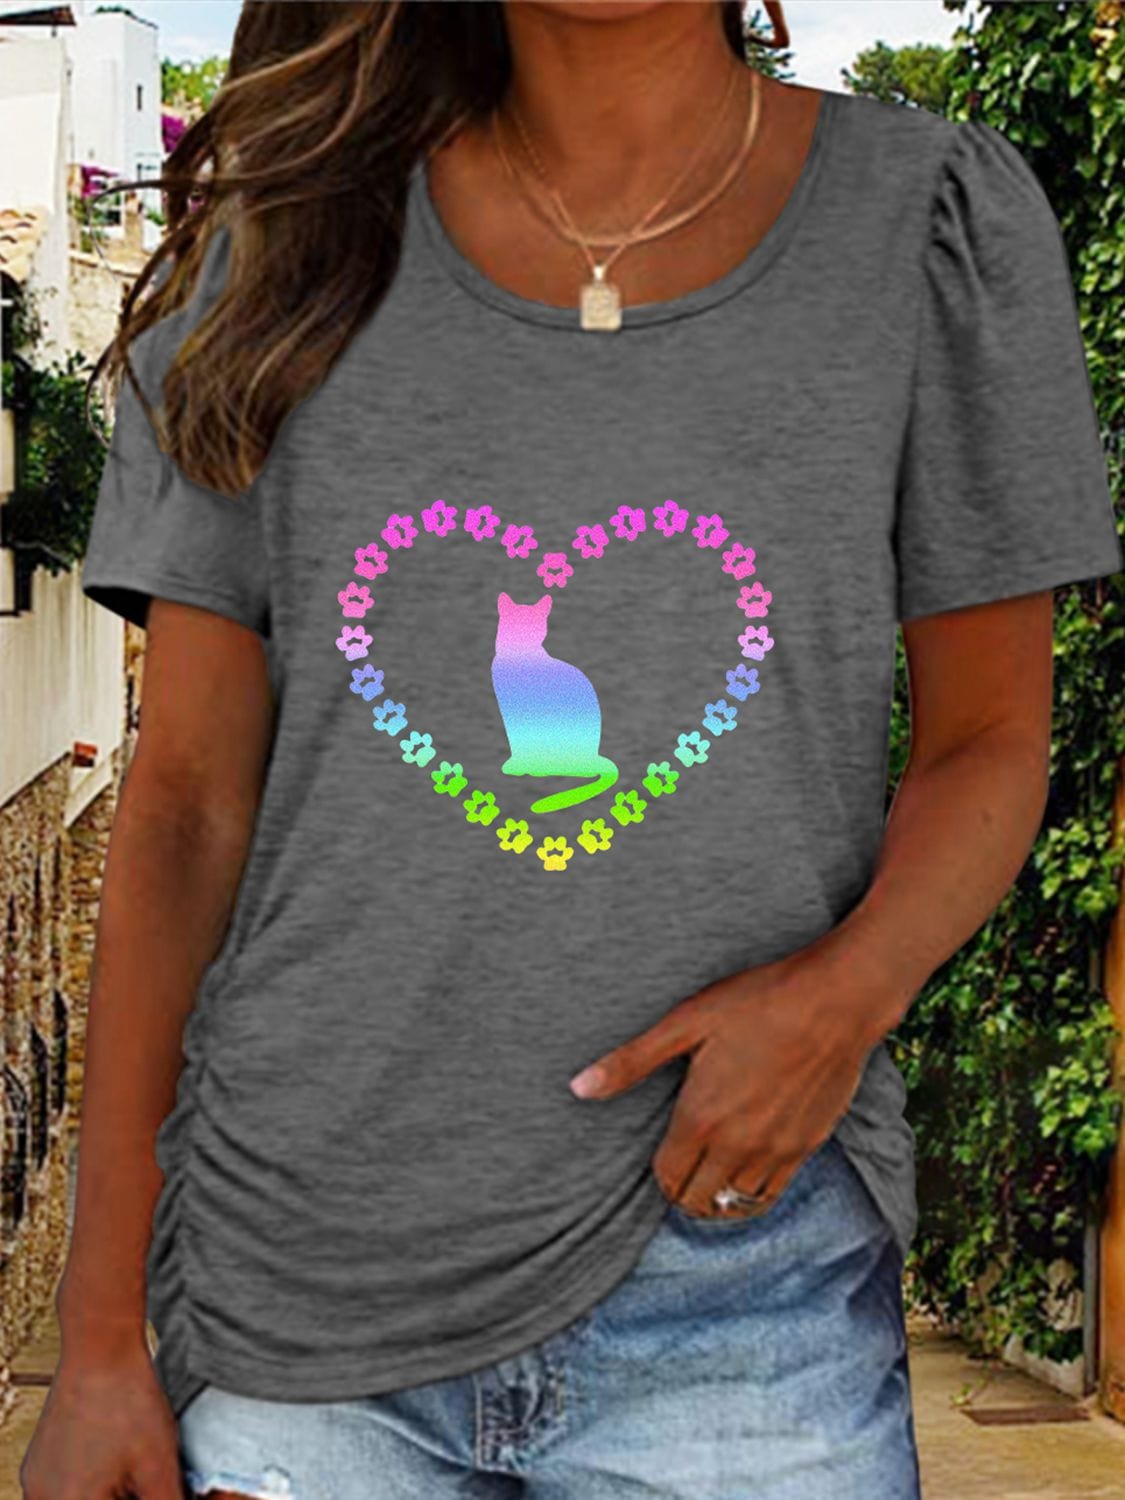 Full Size Cat Heart Graphic Short Sleeve T-Shirt - CLASSY CLOSET BOUTIQUEFull Size Cat Heart Graphic Short Sleeve T-Shirttops100101532913317100101532913317CharcoalS